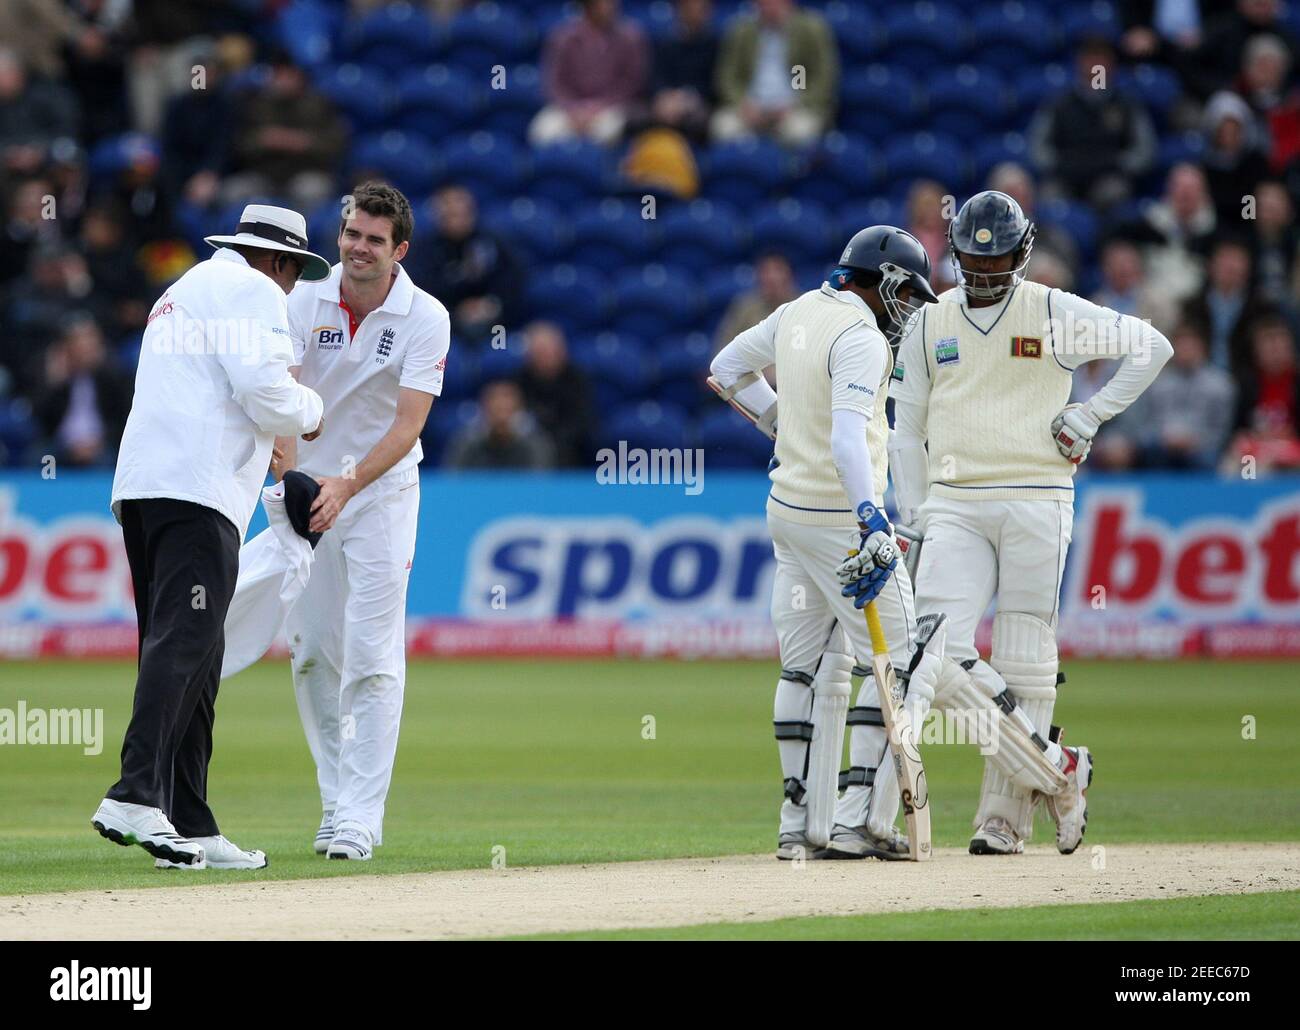 Cricket - England / Sri Lanka npower Test Series First Test Day One - The SWALEC Stadium, Cardiff, Wales - 26/5/11 Englands James Anderson (2nd L) remonstrates with Schiedsrichter Aleem dar (L) after a Delivery to Sri Lanka's Tharanga Paranavitana (R) Mandatory Credit: Action Images / Steven Paston Livepic Stockfoto